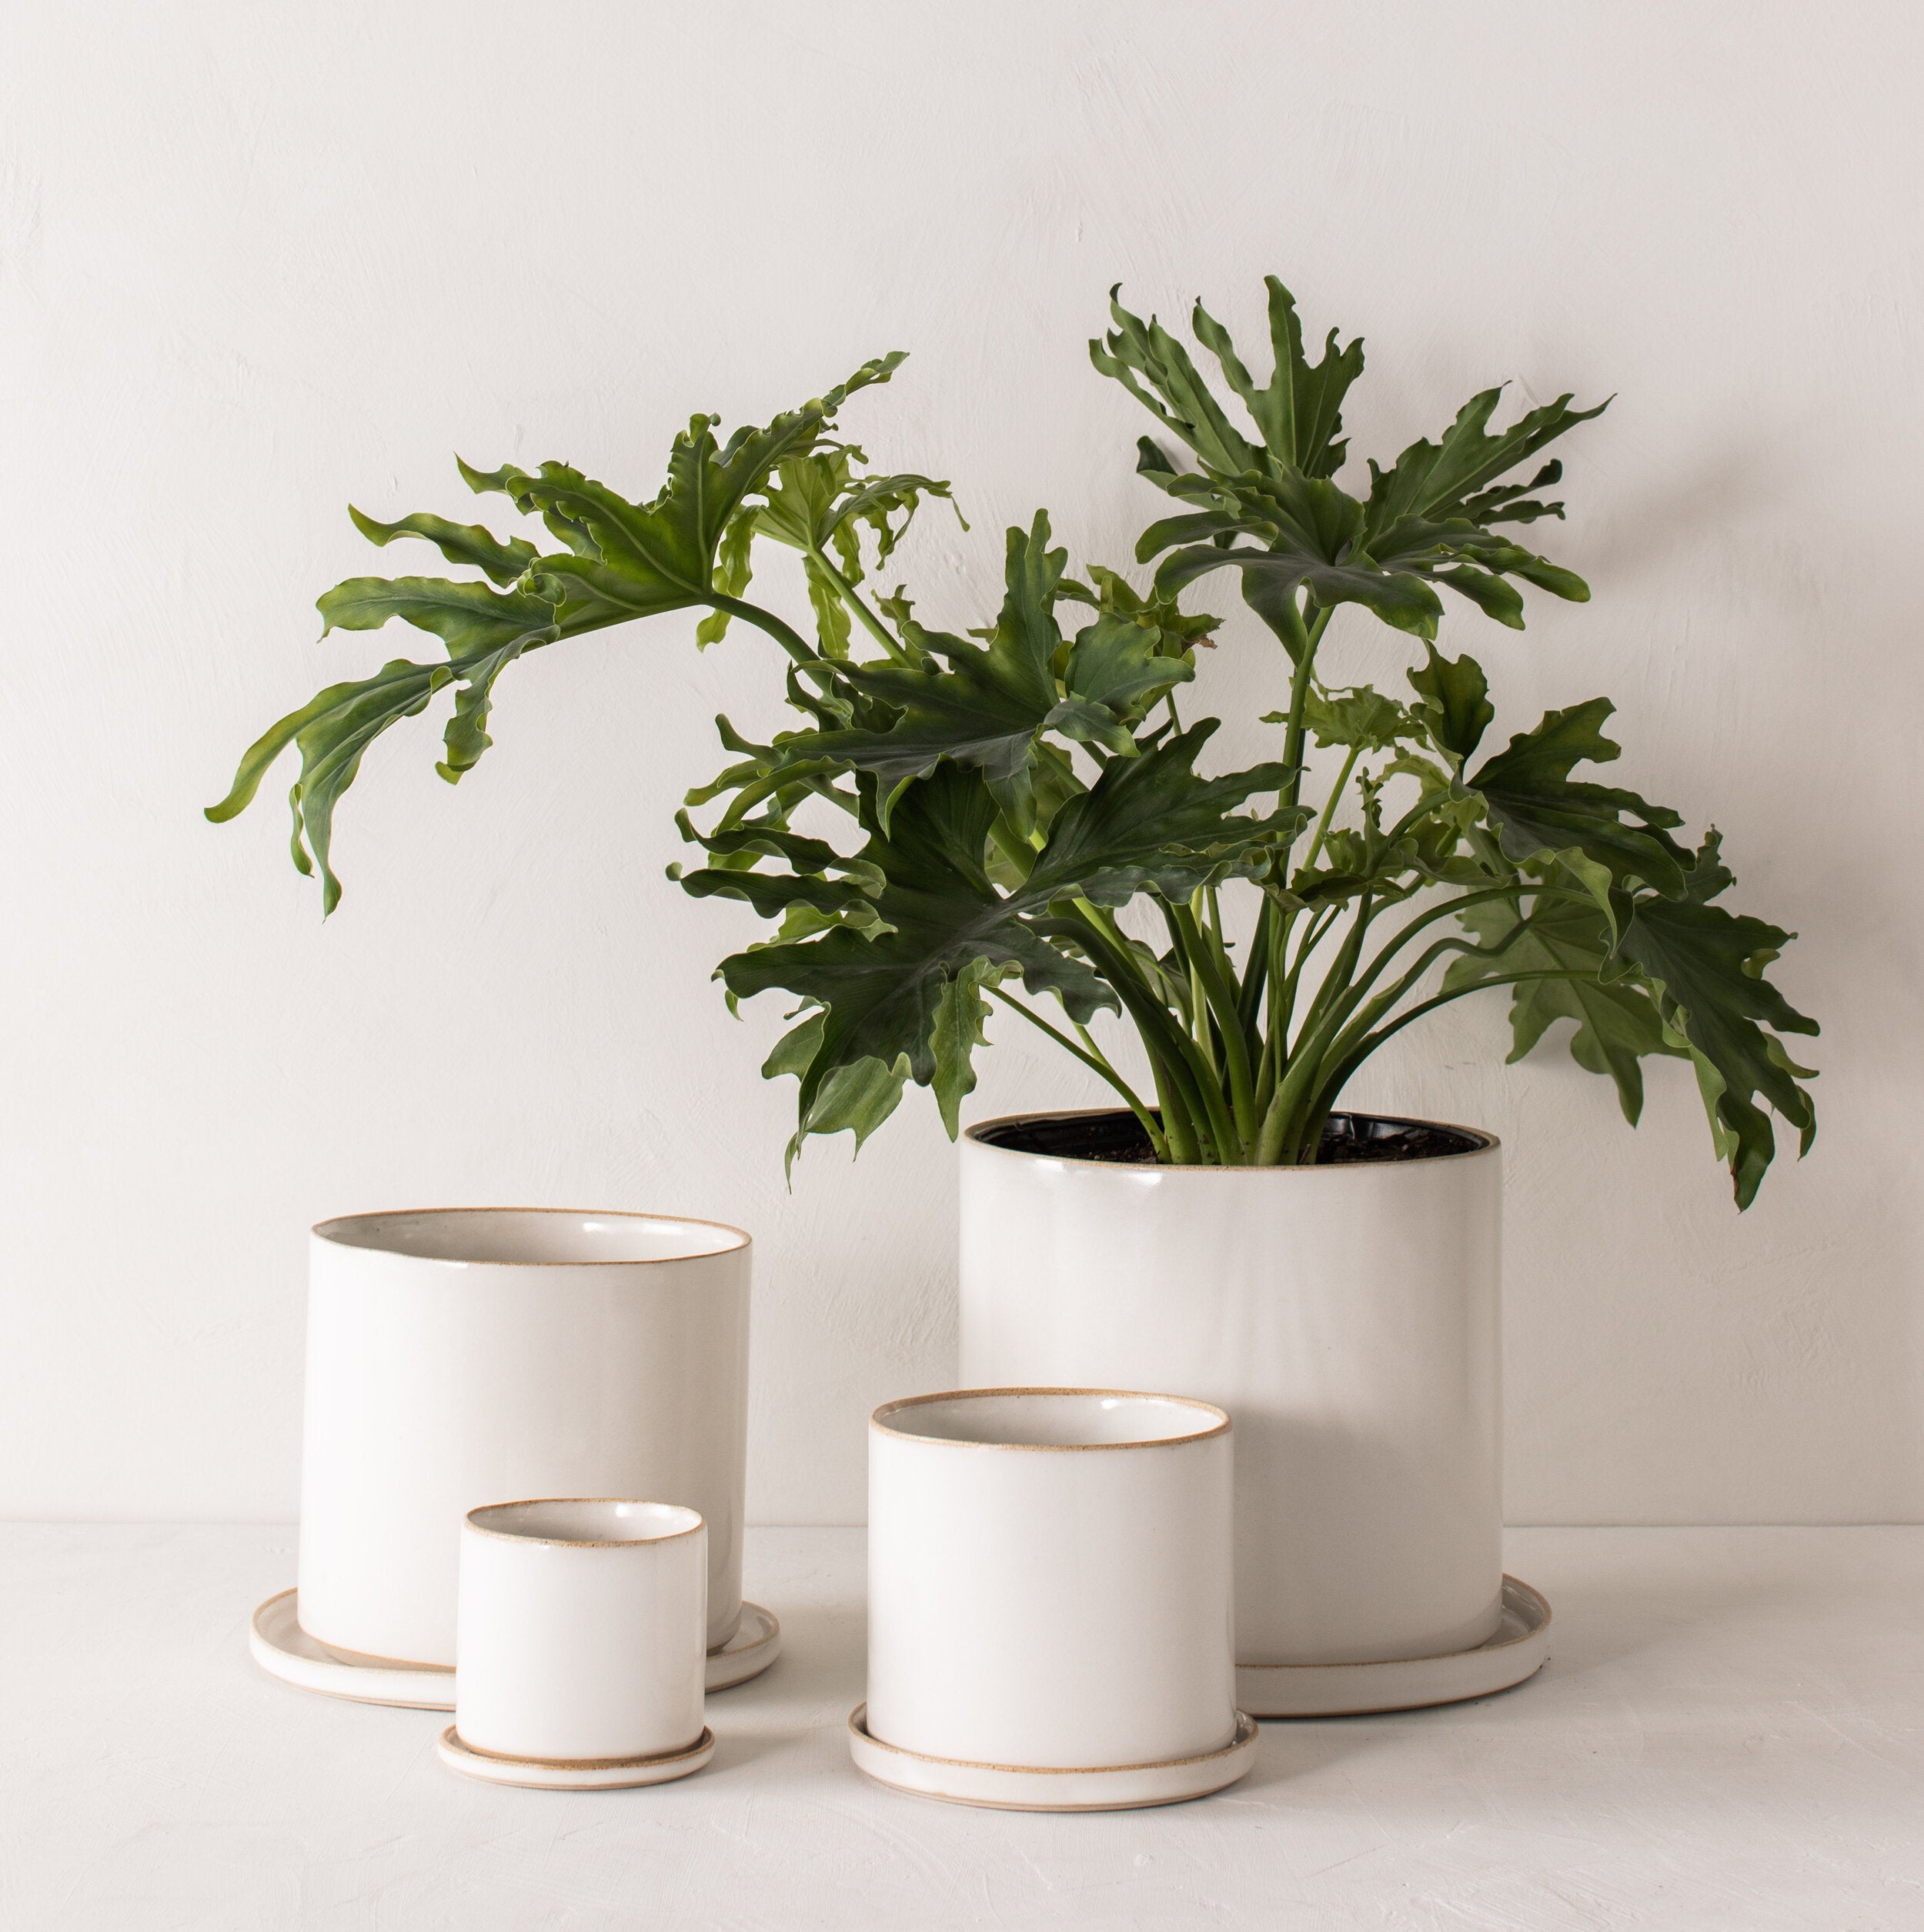 Four white ceramic planters with bottom drainage dishes, 4, 6, 8, and 10 inches. Staged on a white plaster textured tabletop against a plaster textured white wall. Large tall solum plant inside the 10 inch. Designed and sold by Convivial Production, Kansas City Ceramics.  Edit alt text